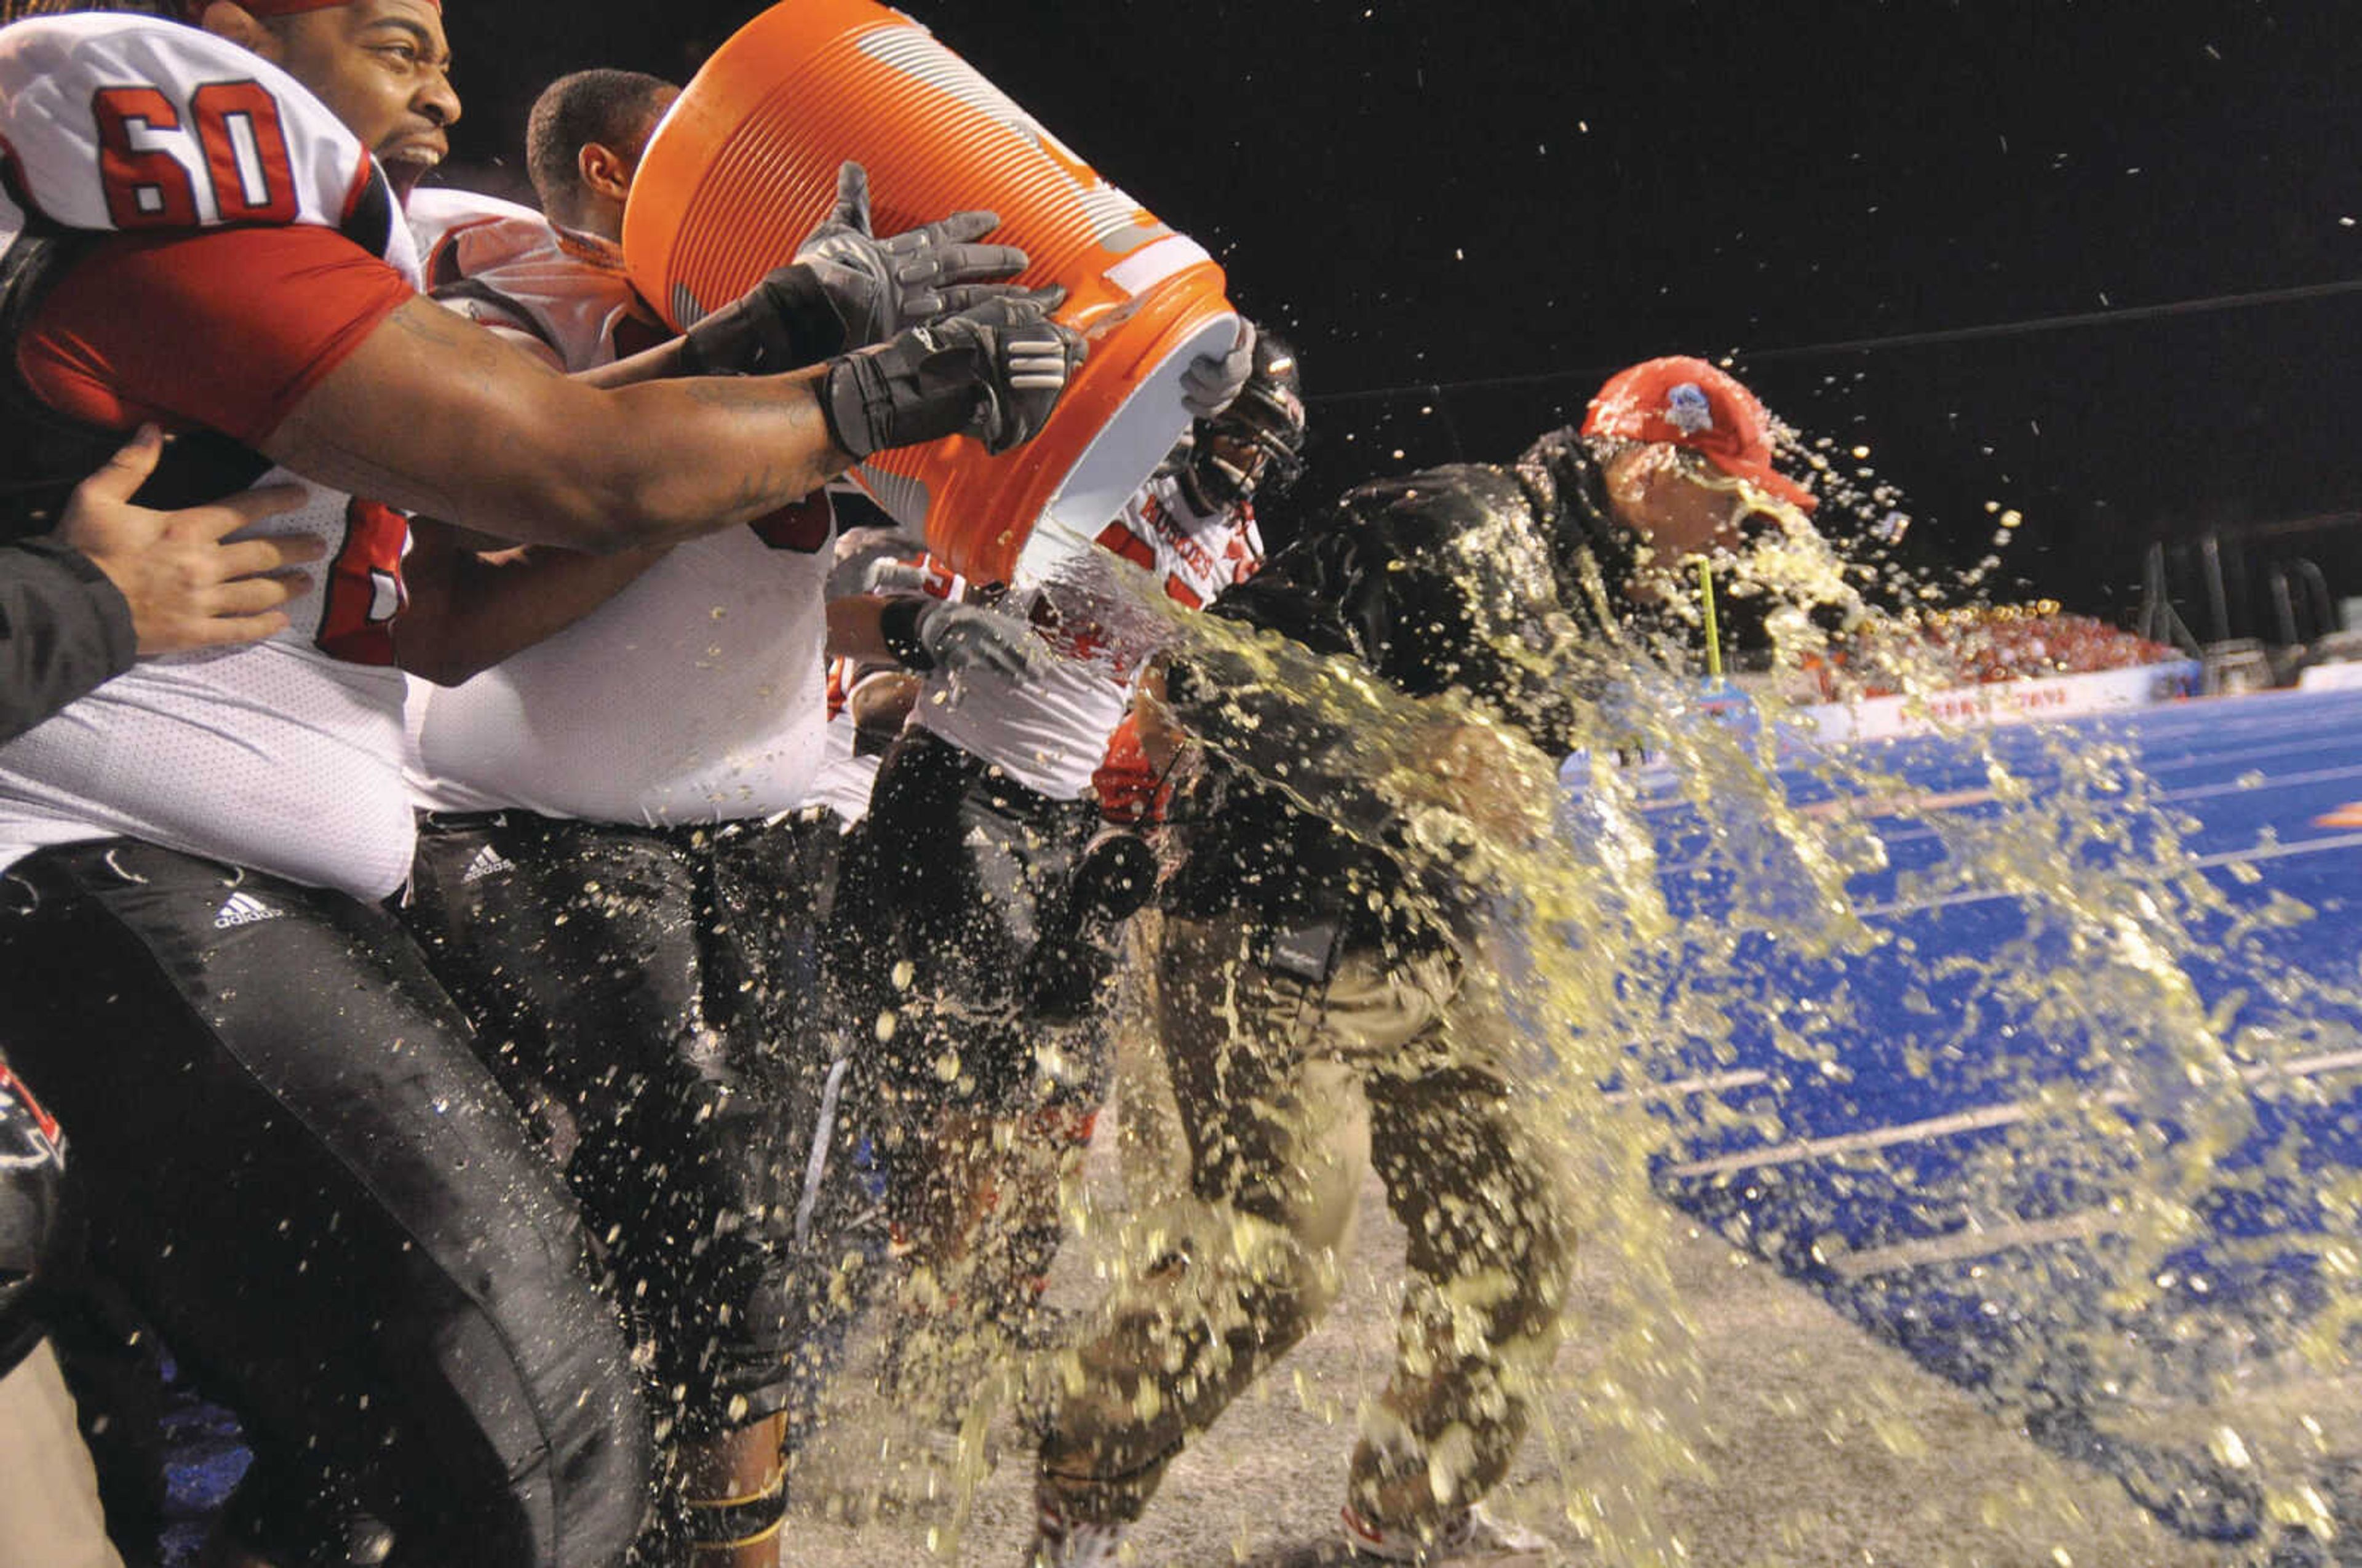 Tom Matukewicz got drenched after leading his former team, the NIU Huskies, to win the Humanitarian Bowl in 2010. Photo by Charlie Litchfield courtesy of Idaho Press Tribune